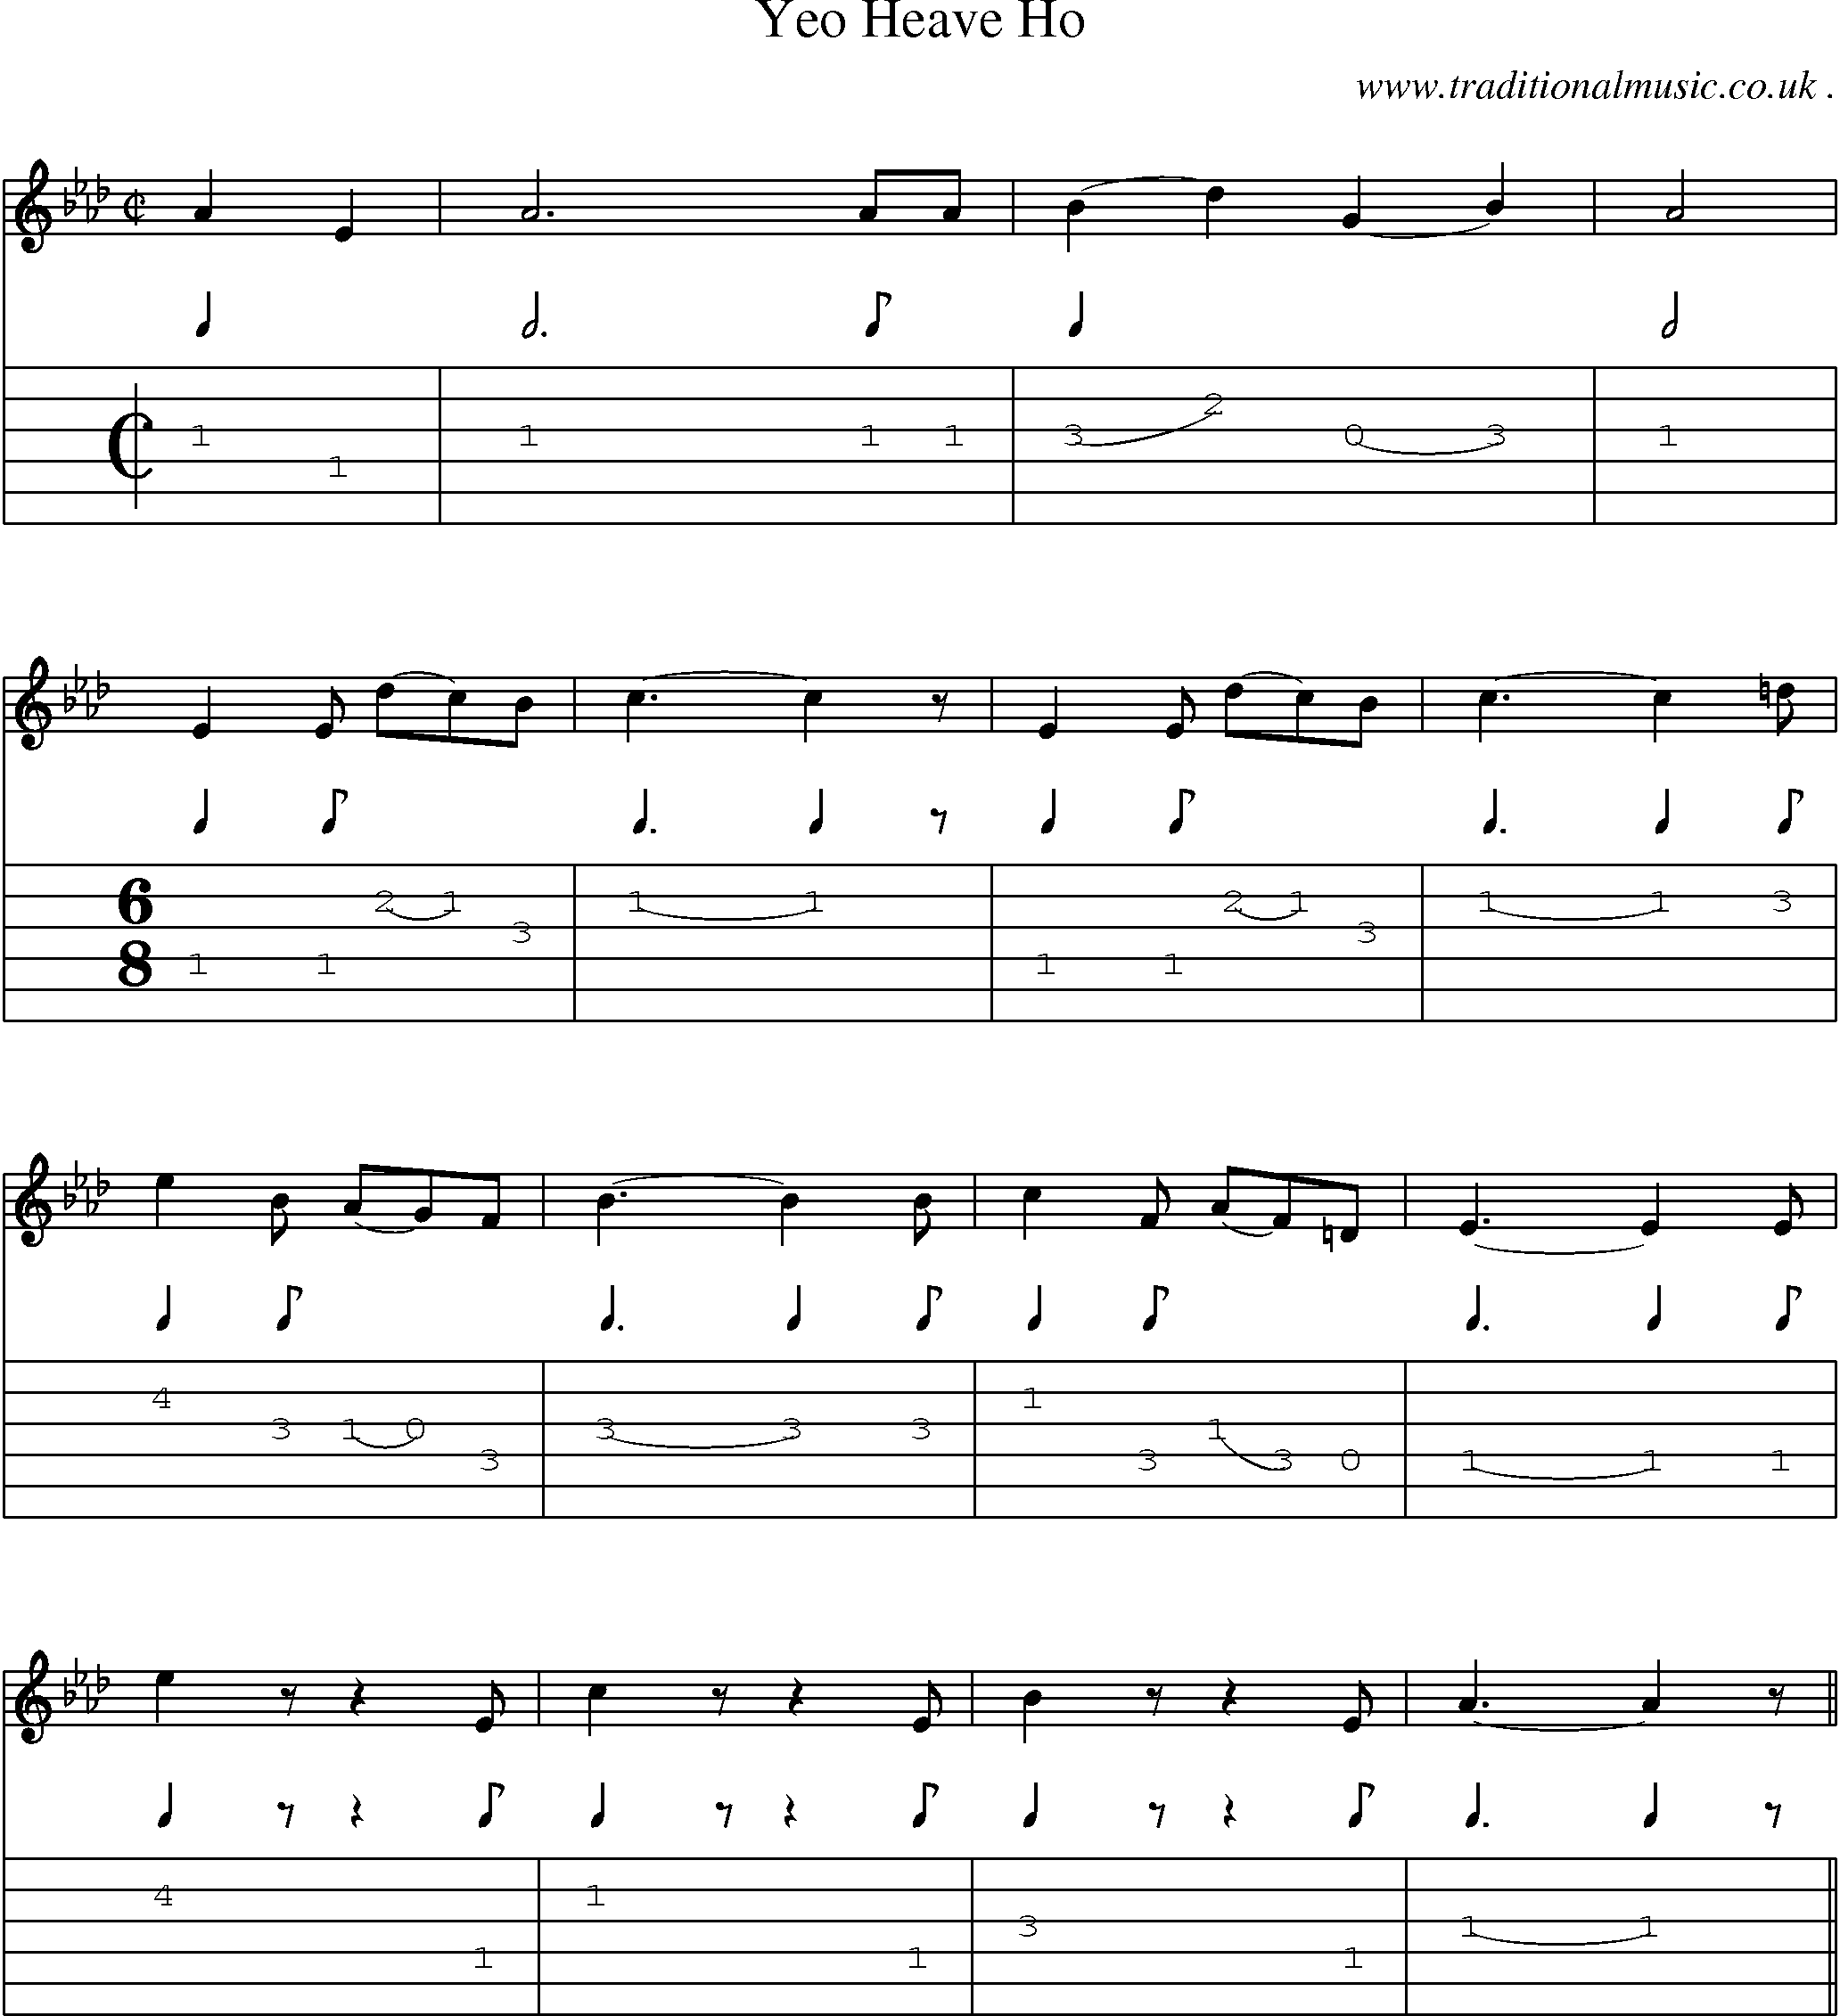 Sheet-Music and Guitar Tabs for Yeo Heave Ho